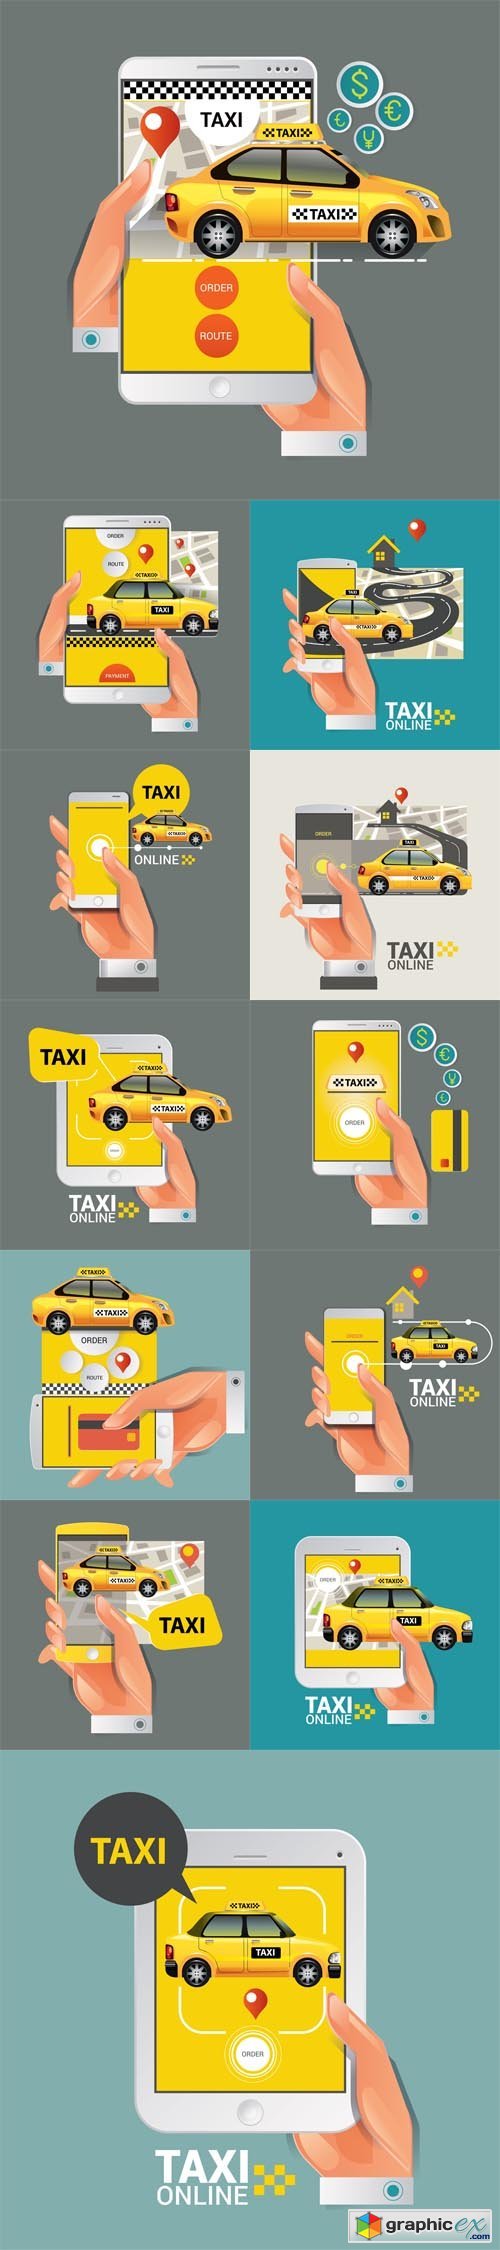 Taxi on line. Taxi sign. Taxi service on smart phone